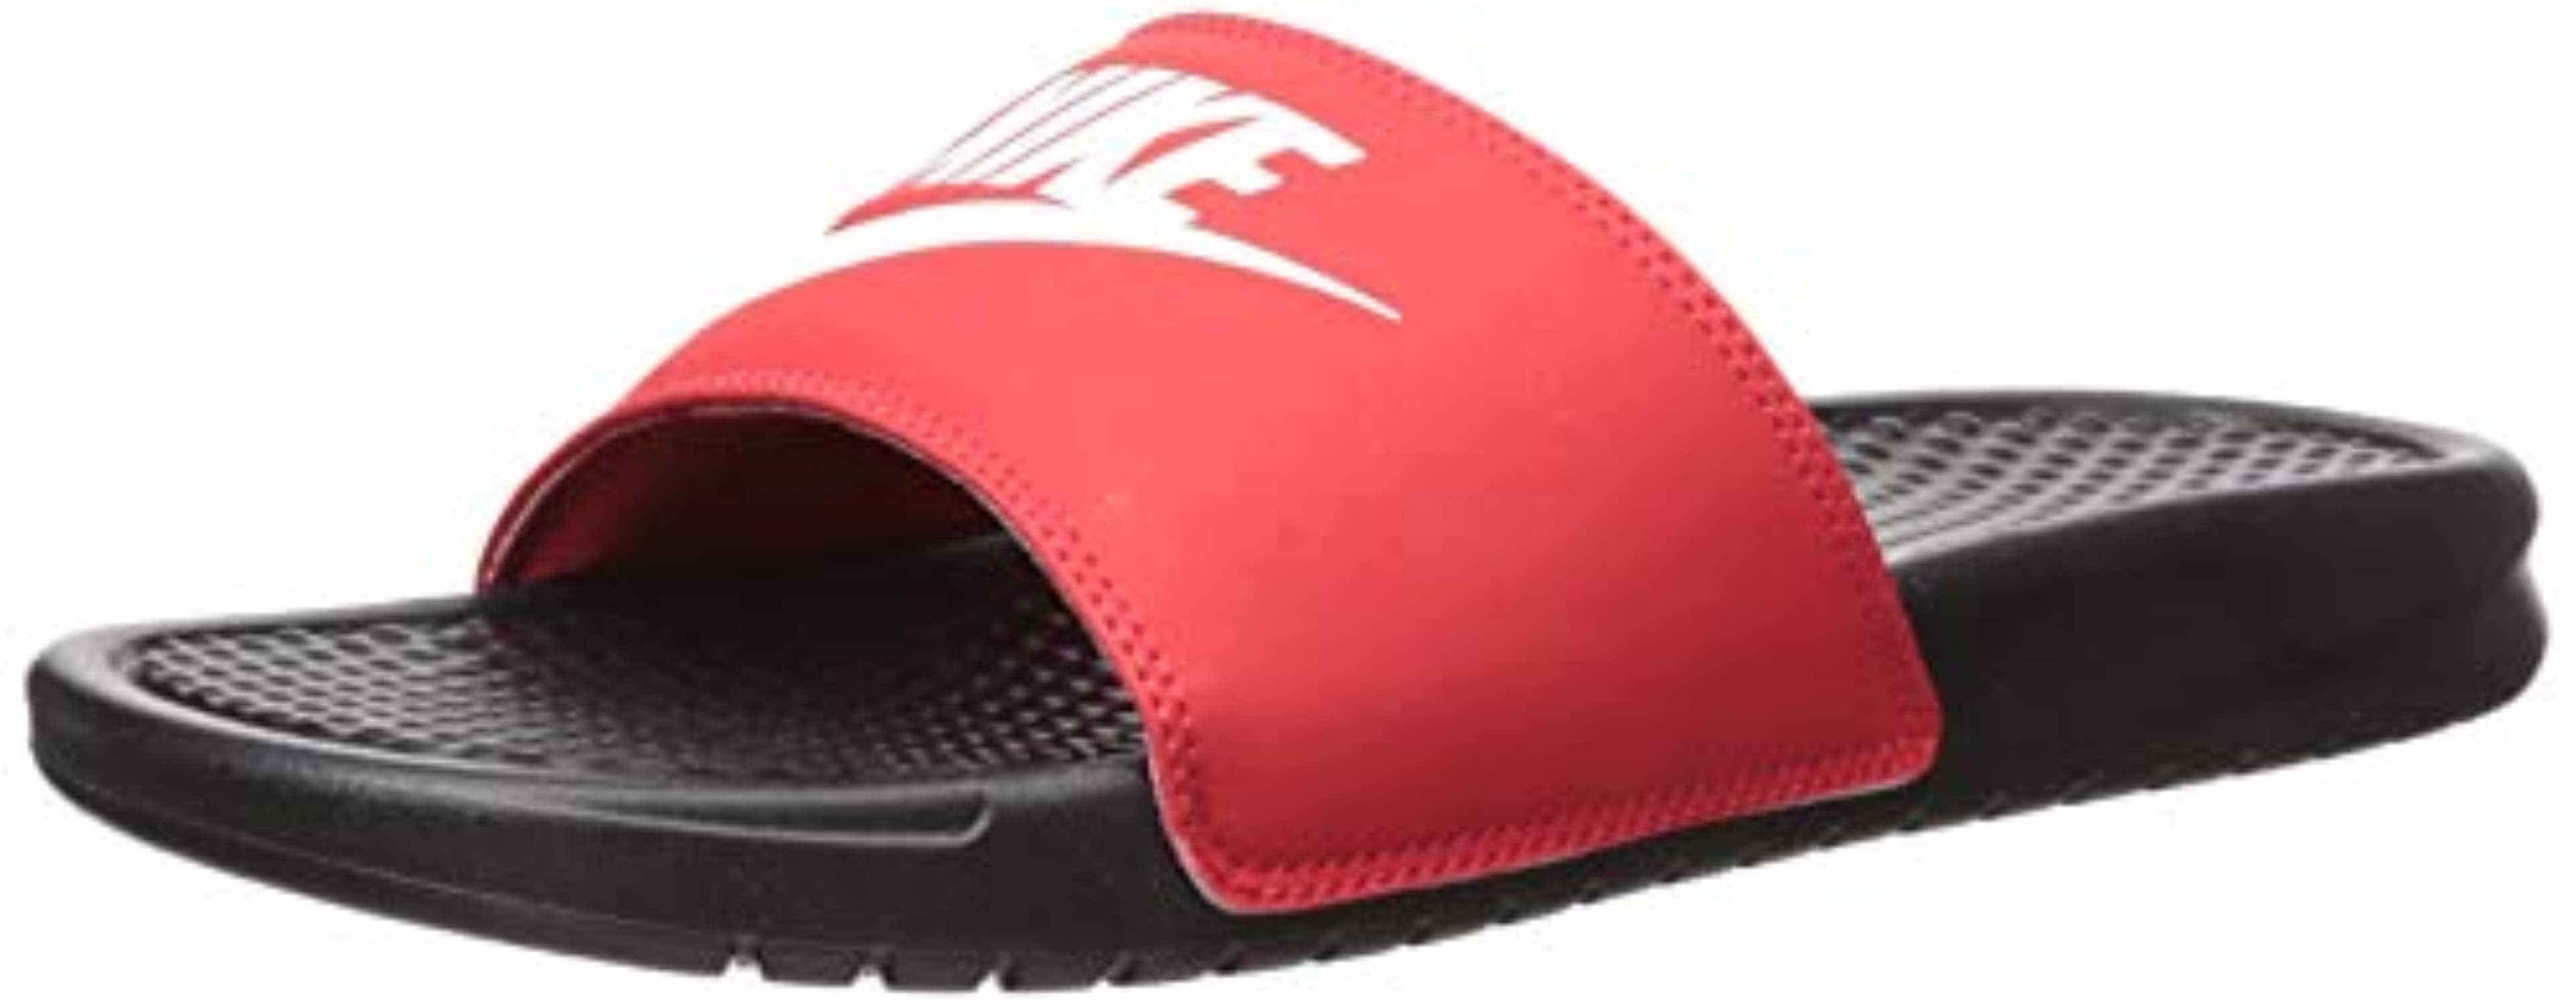 red and black nike slippers